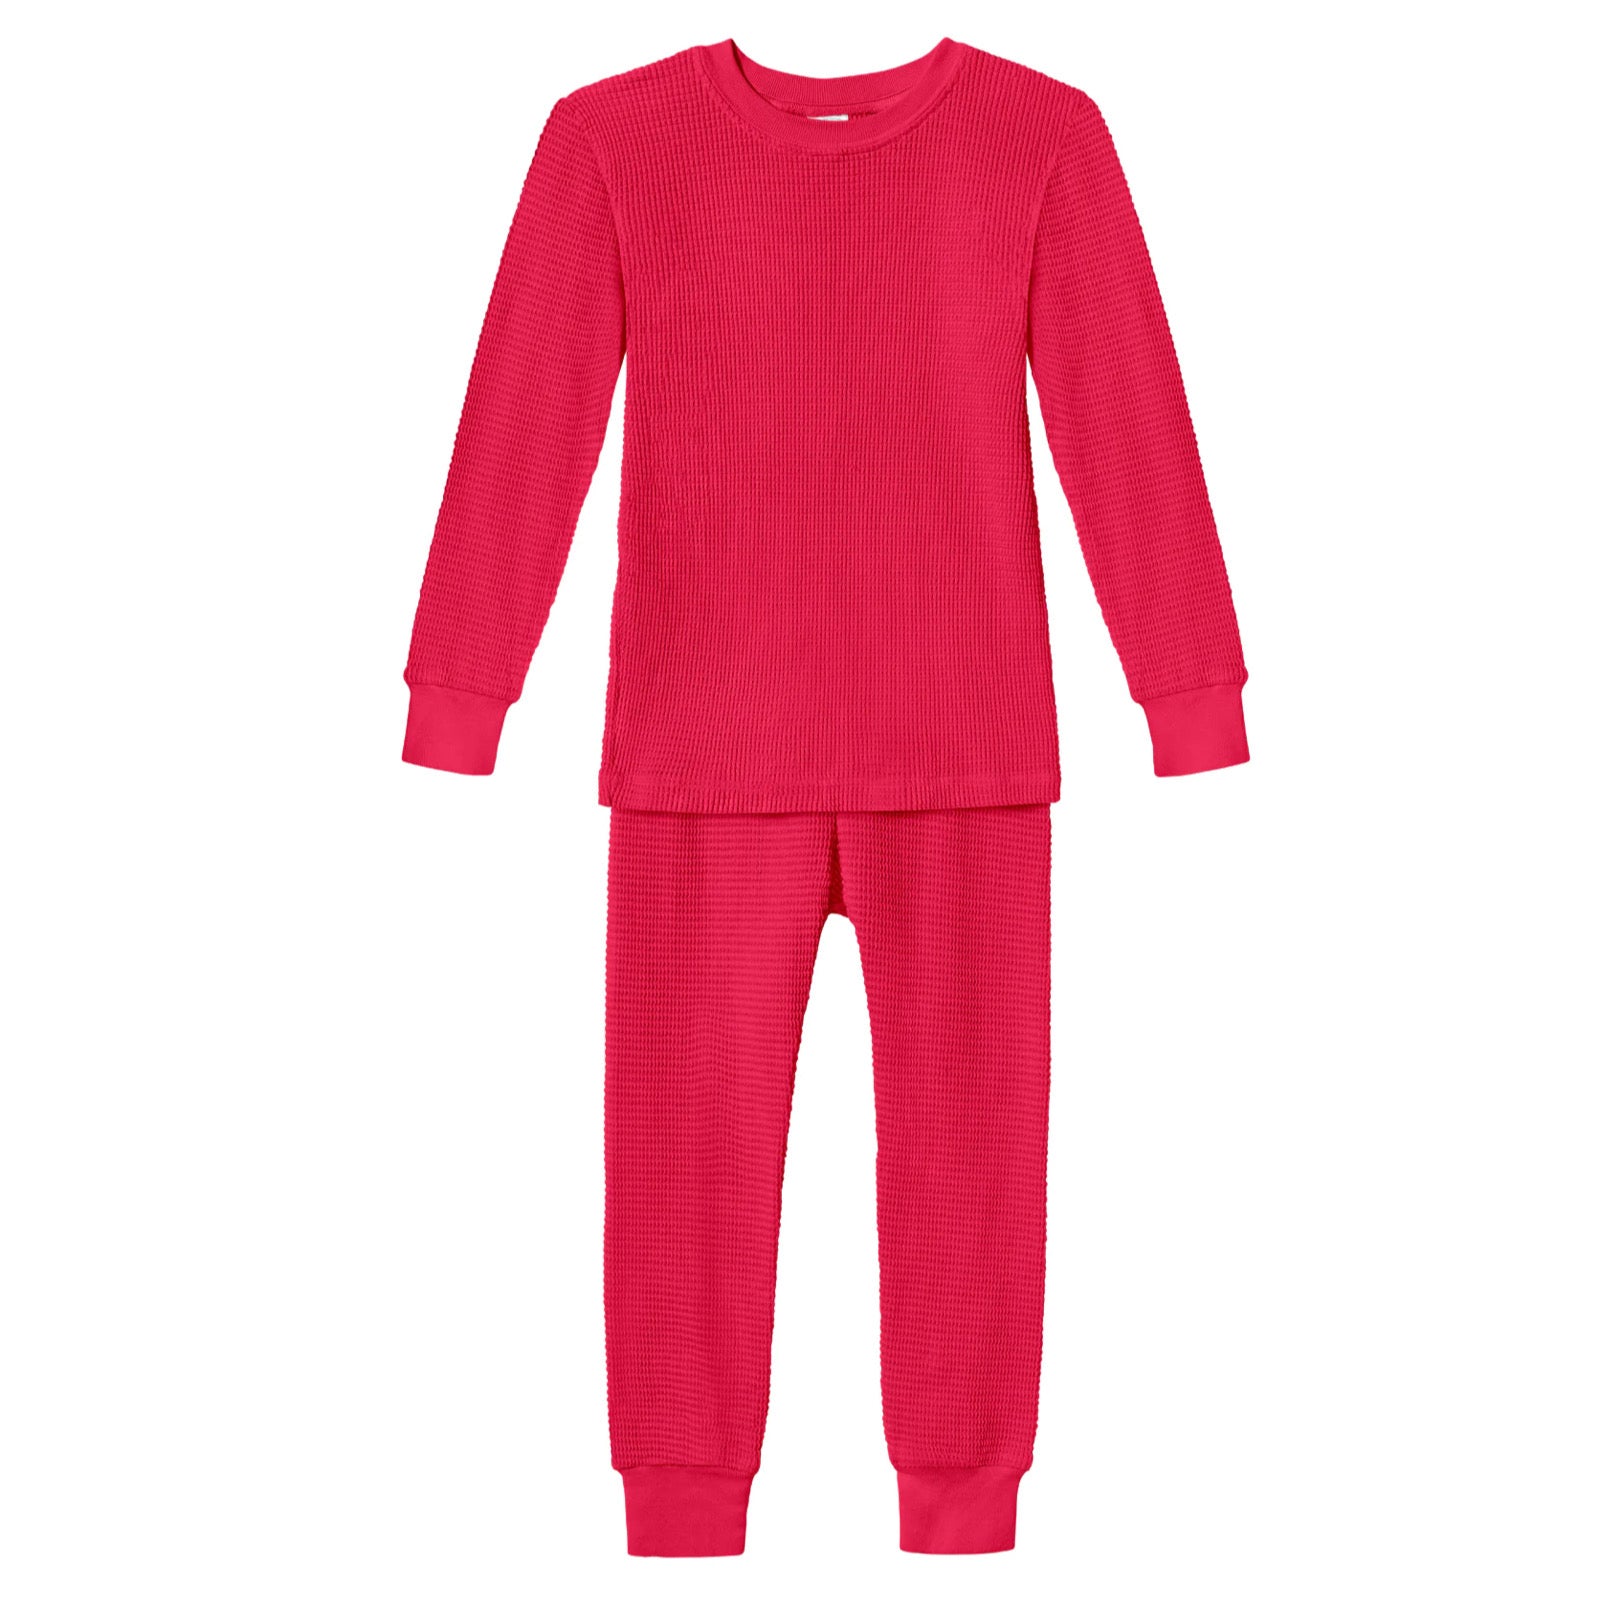 Infant red Moose cheeks thermal underwear 100% rib cotton.